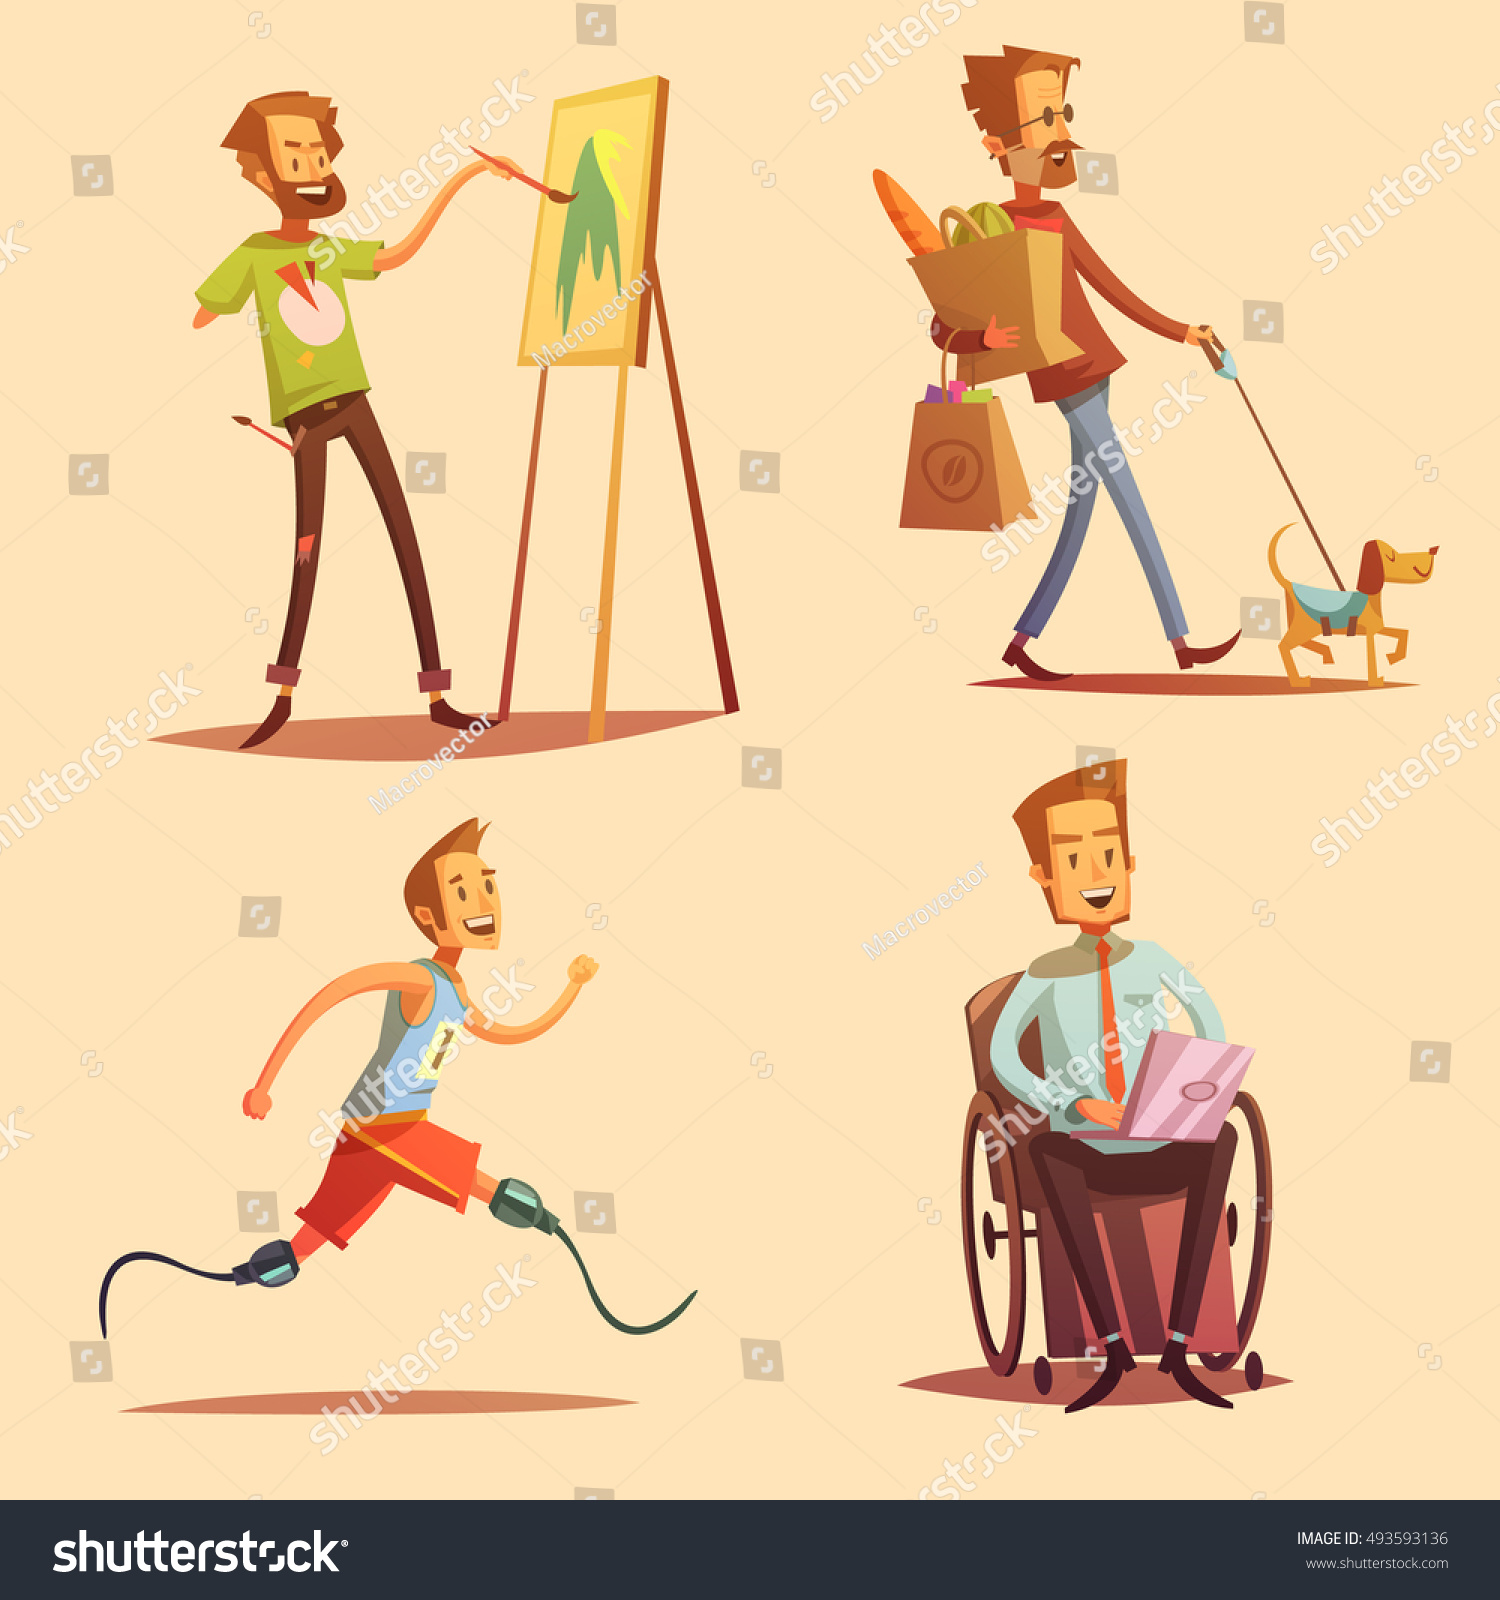 SVG of  Disabled people leading happy life retro cartoon 2x2 flat icons set isolated vector illustration svg